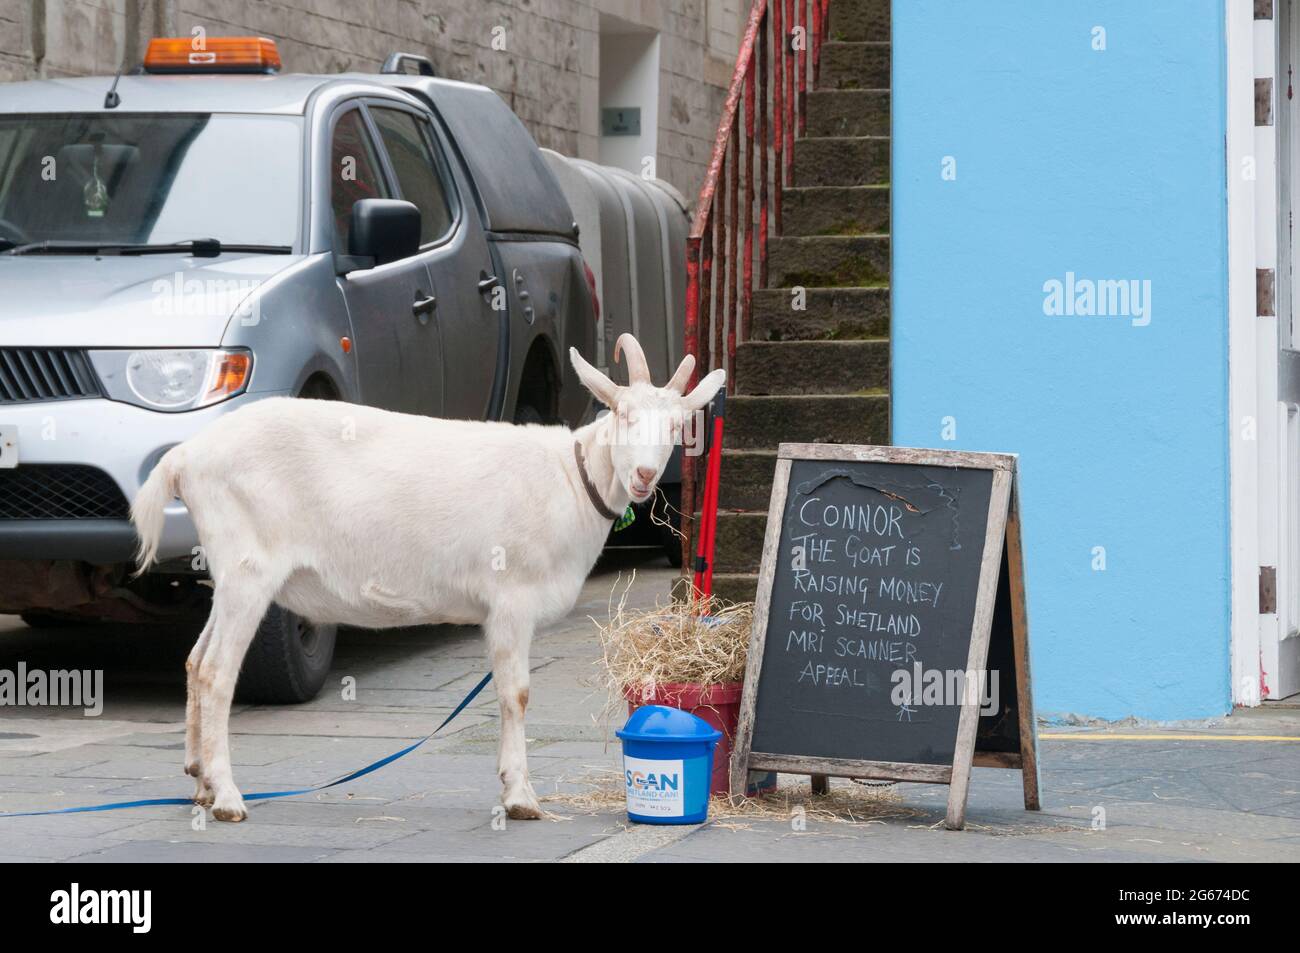 Connor the Goat in Lerwick fundraising for the Shetland MRI Scanner appeal. Stock Photo